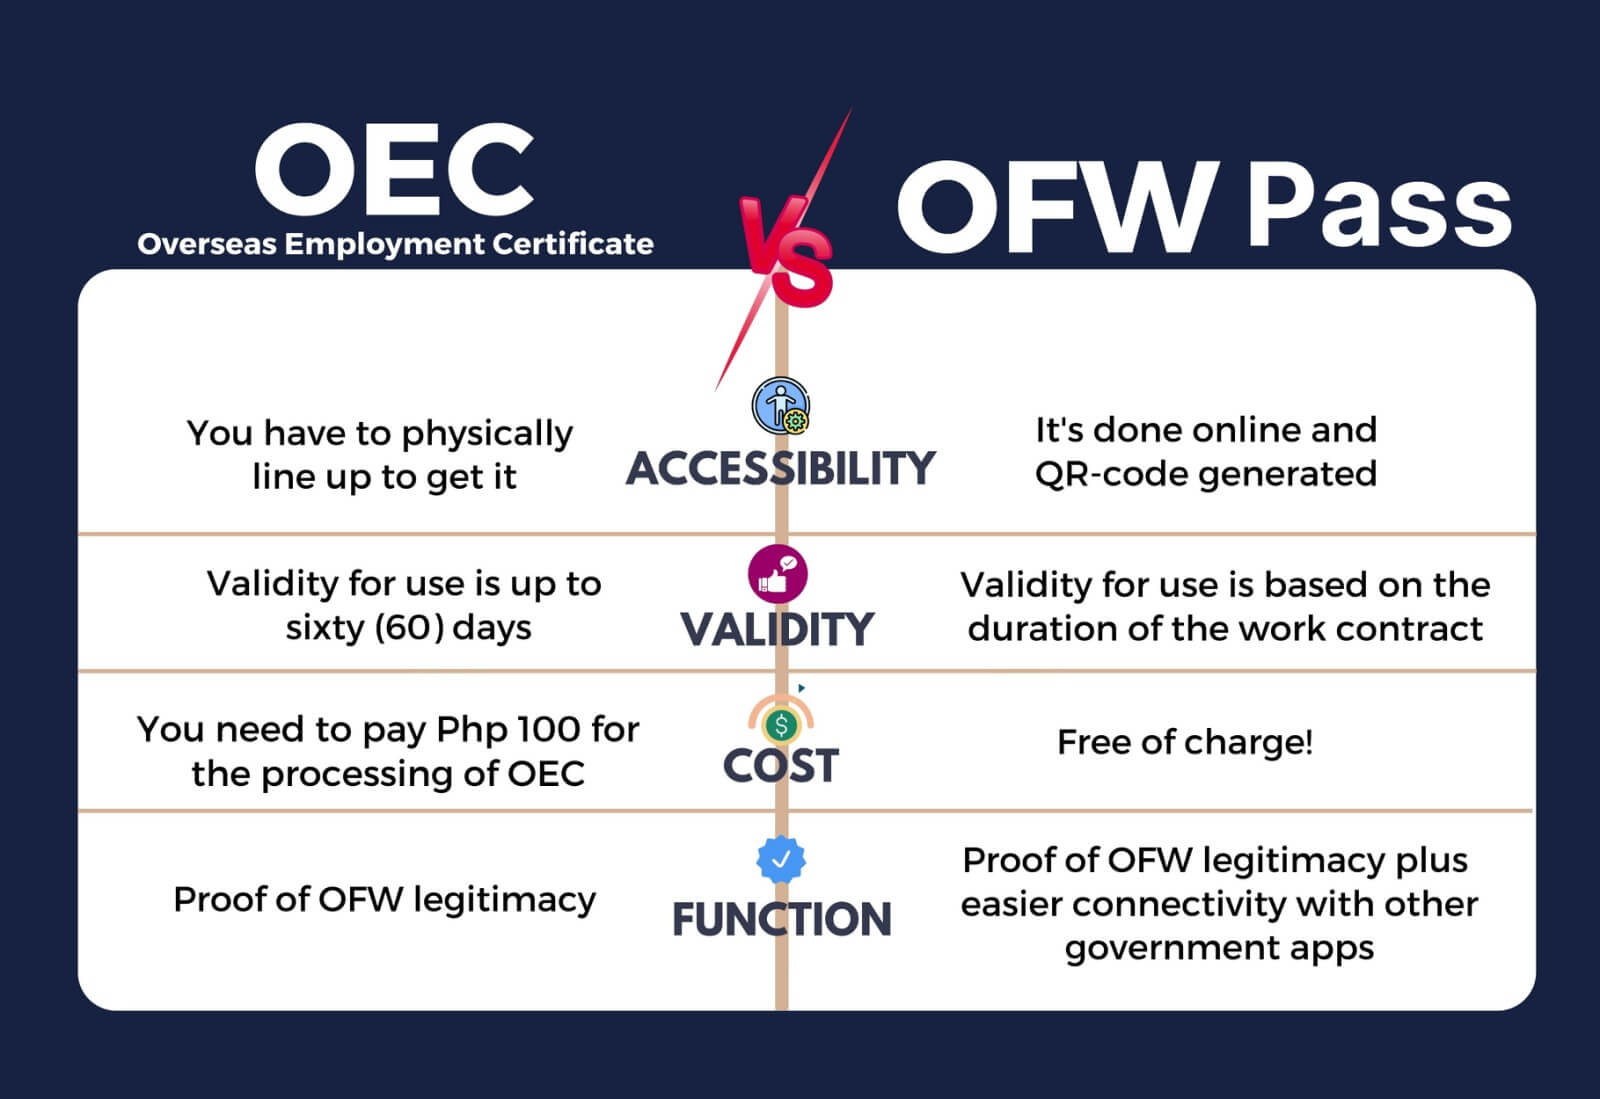 difference between oec and ofw pass